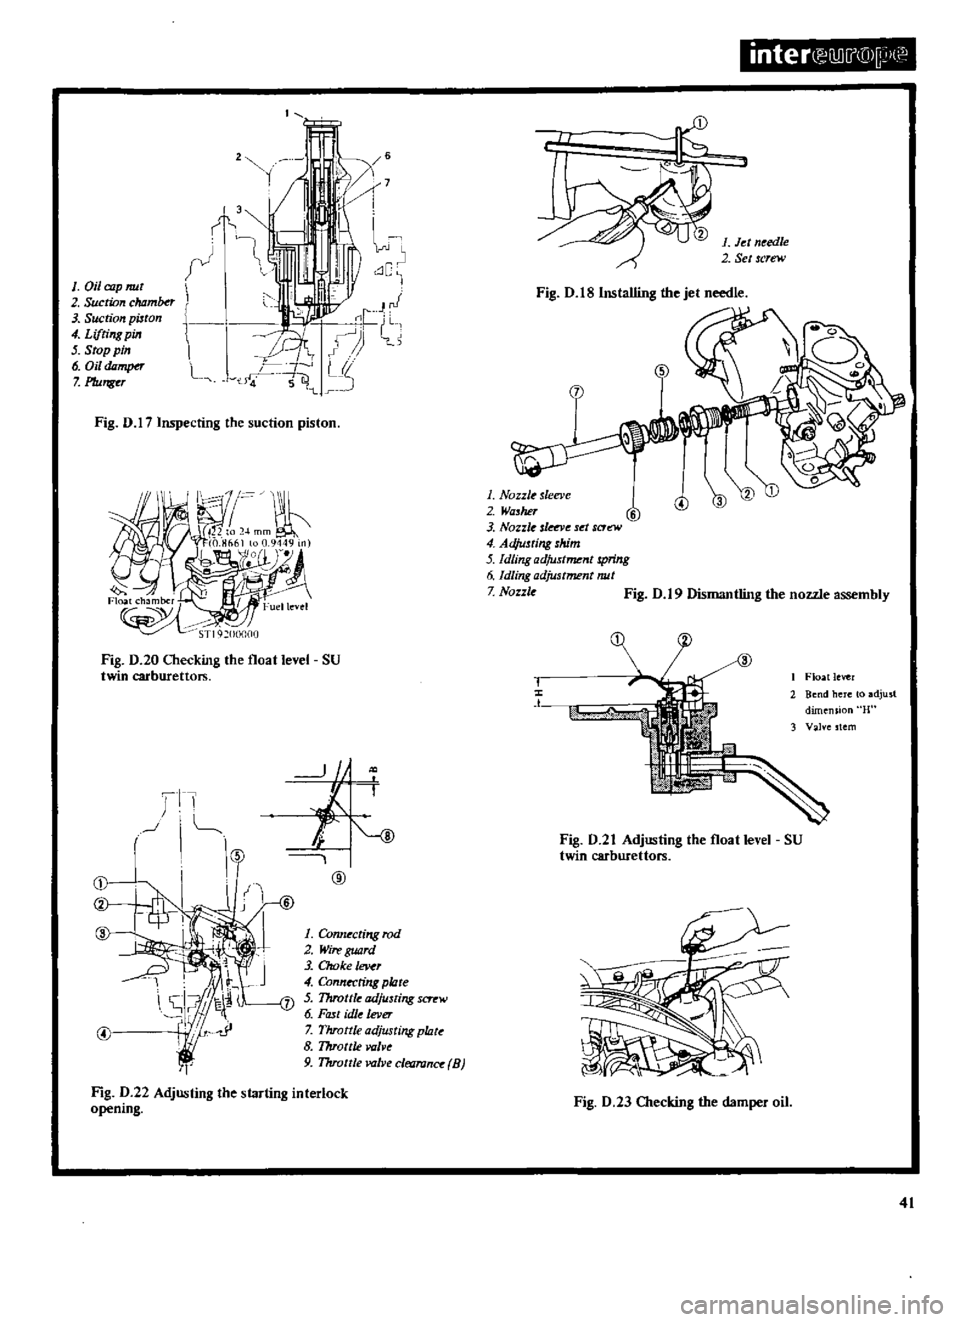 DATSUN 510 1969  Service Service Manual 
1

Oil 
cap 
nut

2 
Suction

chomber

3 
Suction

piston

4

Li

tingpin

S

Stop 
pin

6 
Oil

dDmper

7

Plunger 
3

j

I

r

L 
2

1

Fig 
0 
17

Inspecting 
the

suction

piston

STlq 
O

OO

Fi